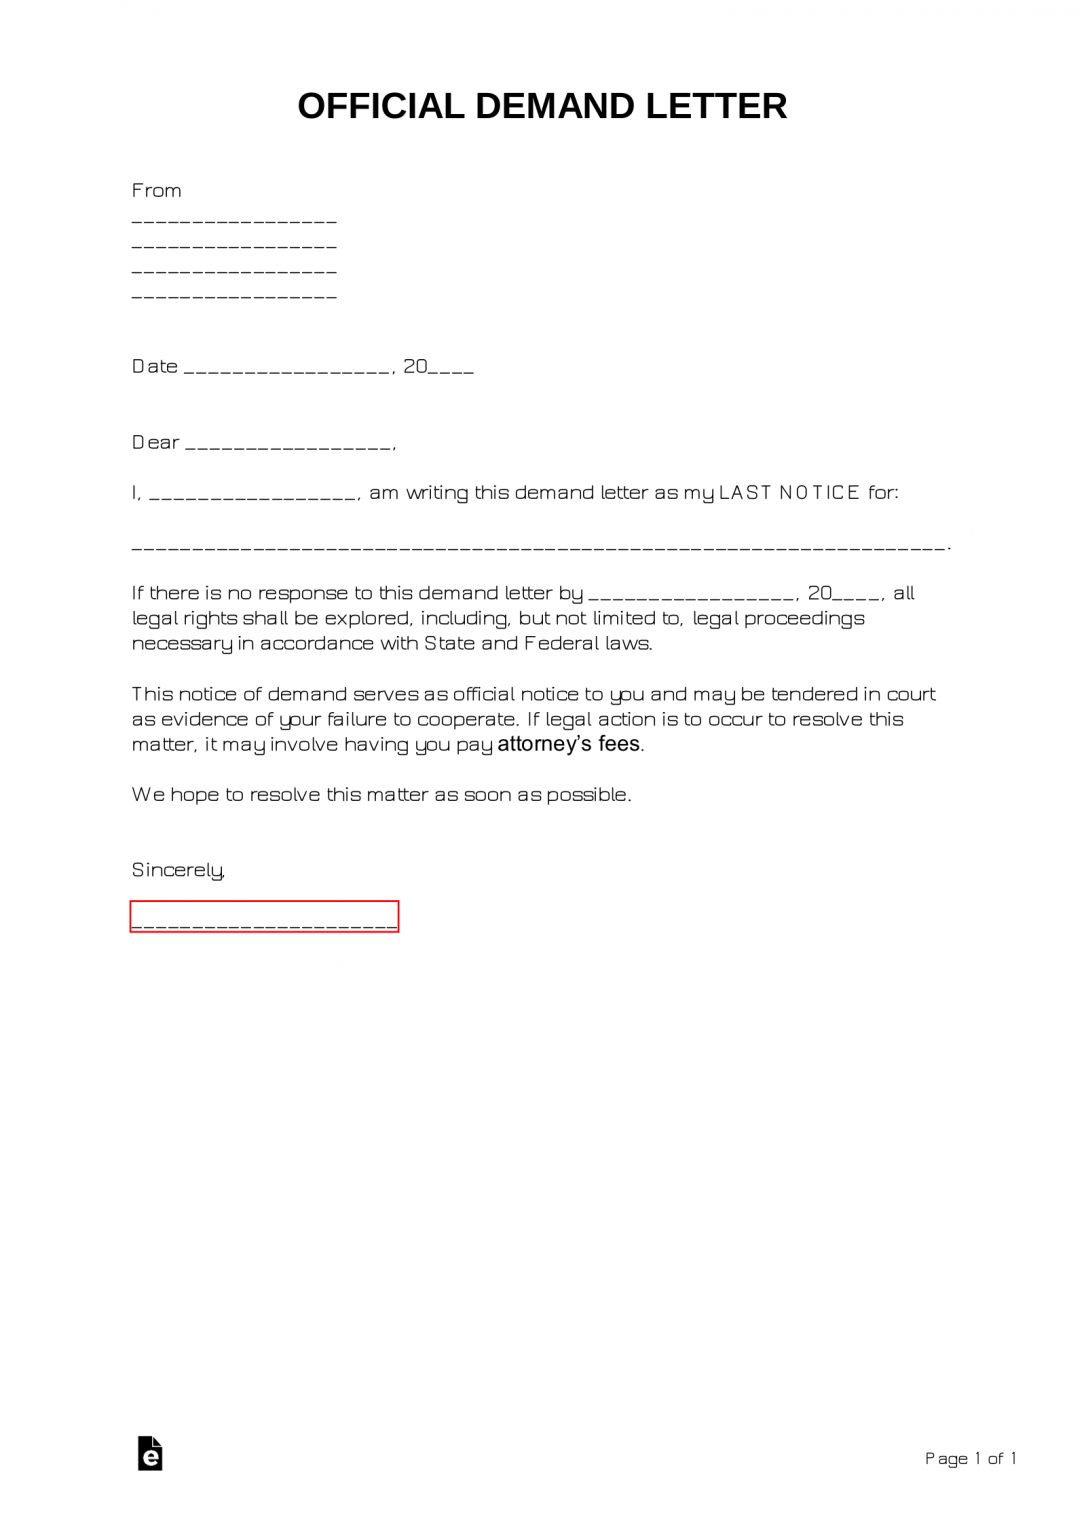 Free Demand Letter Templates ALL TYPES with Samples PDF Word eForms